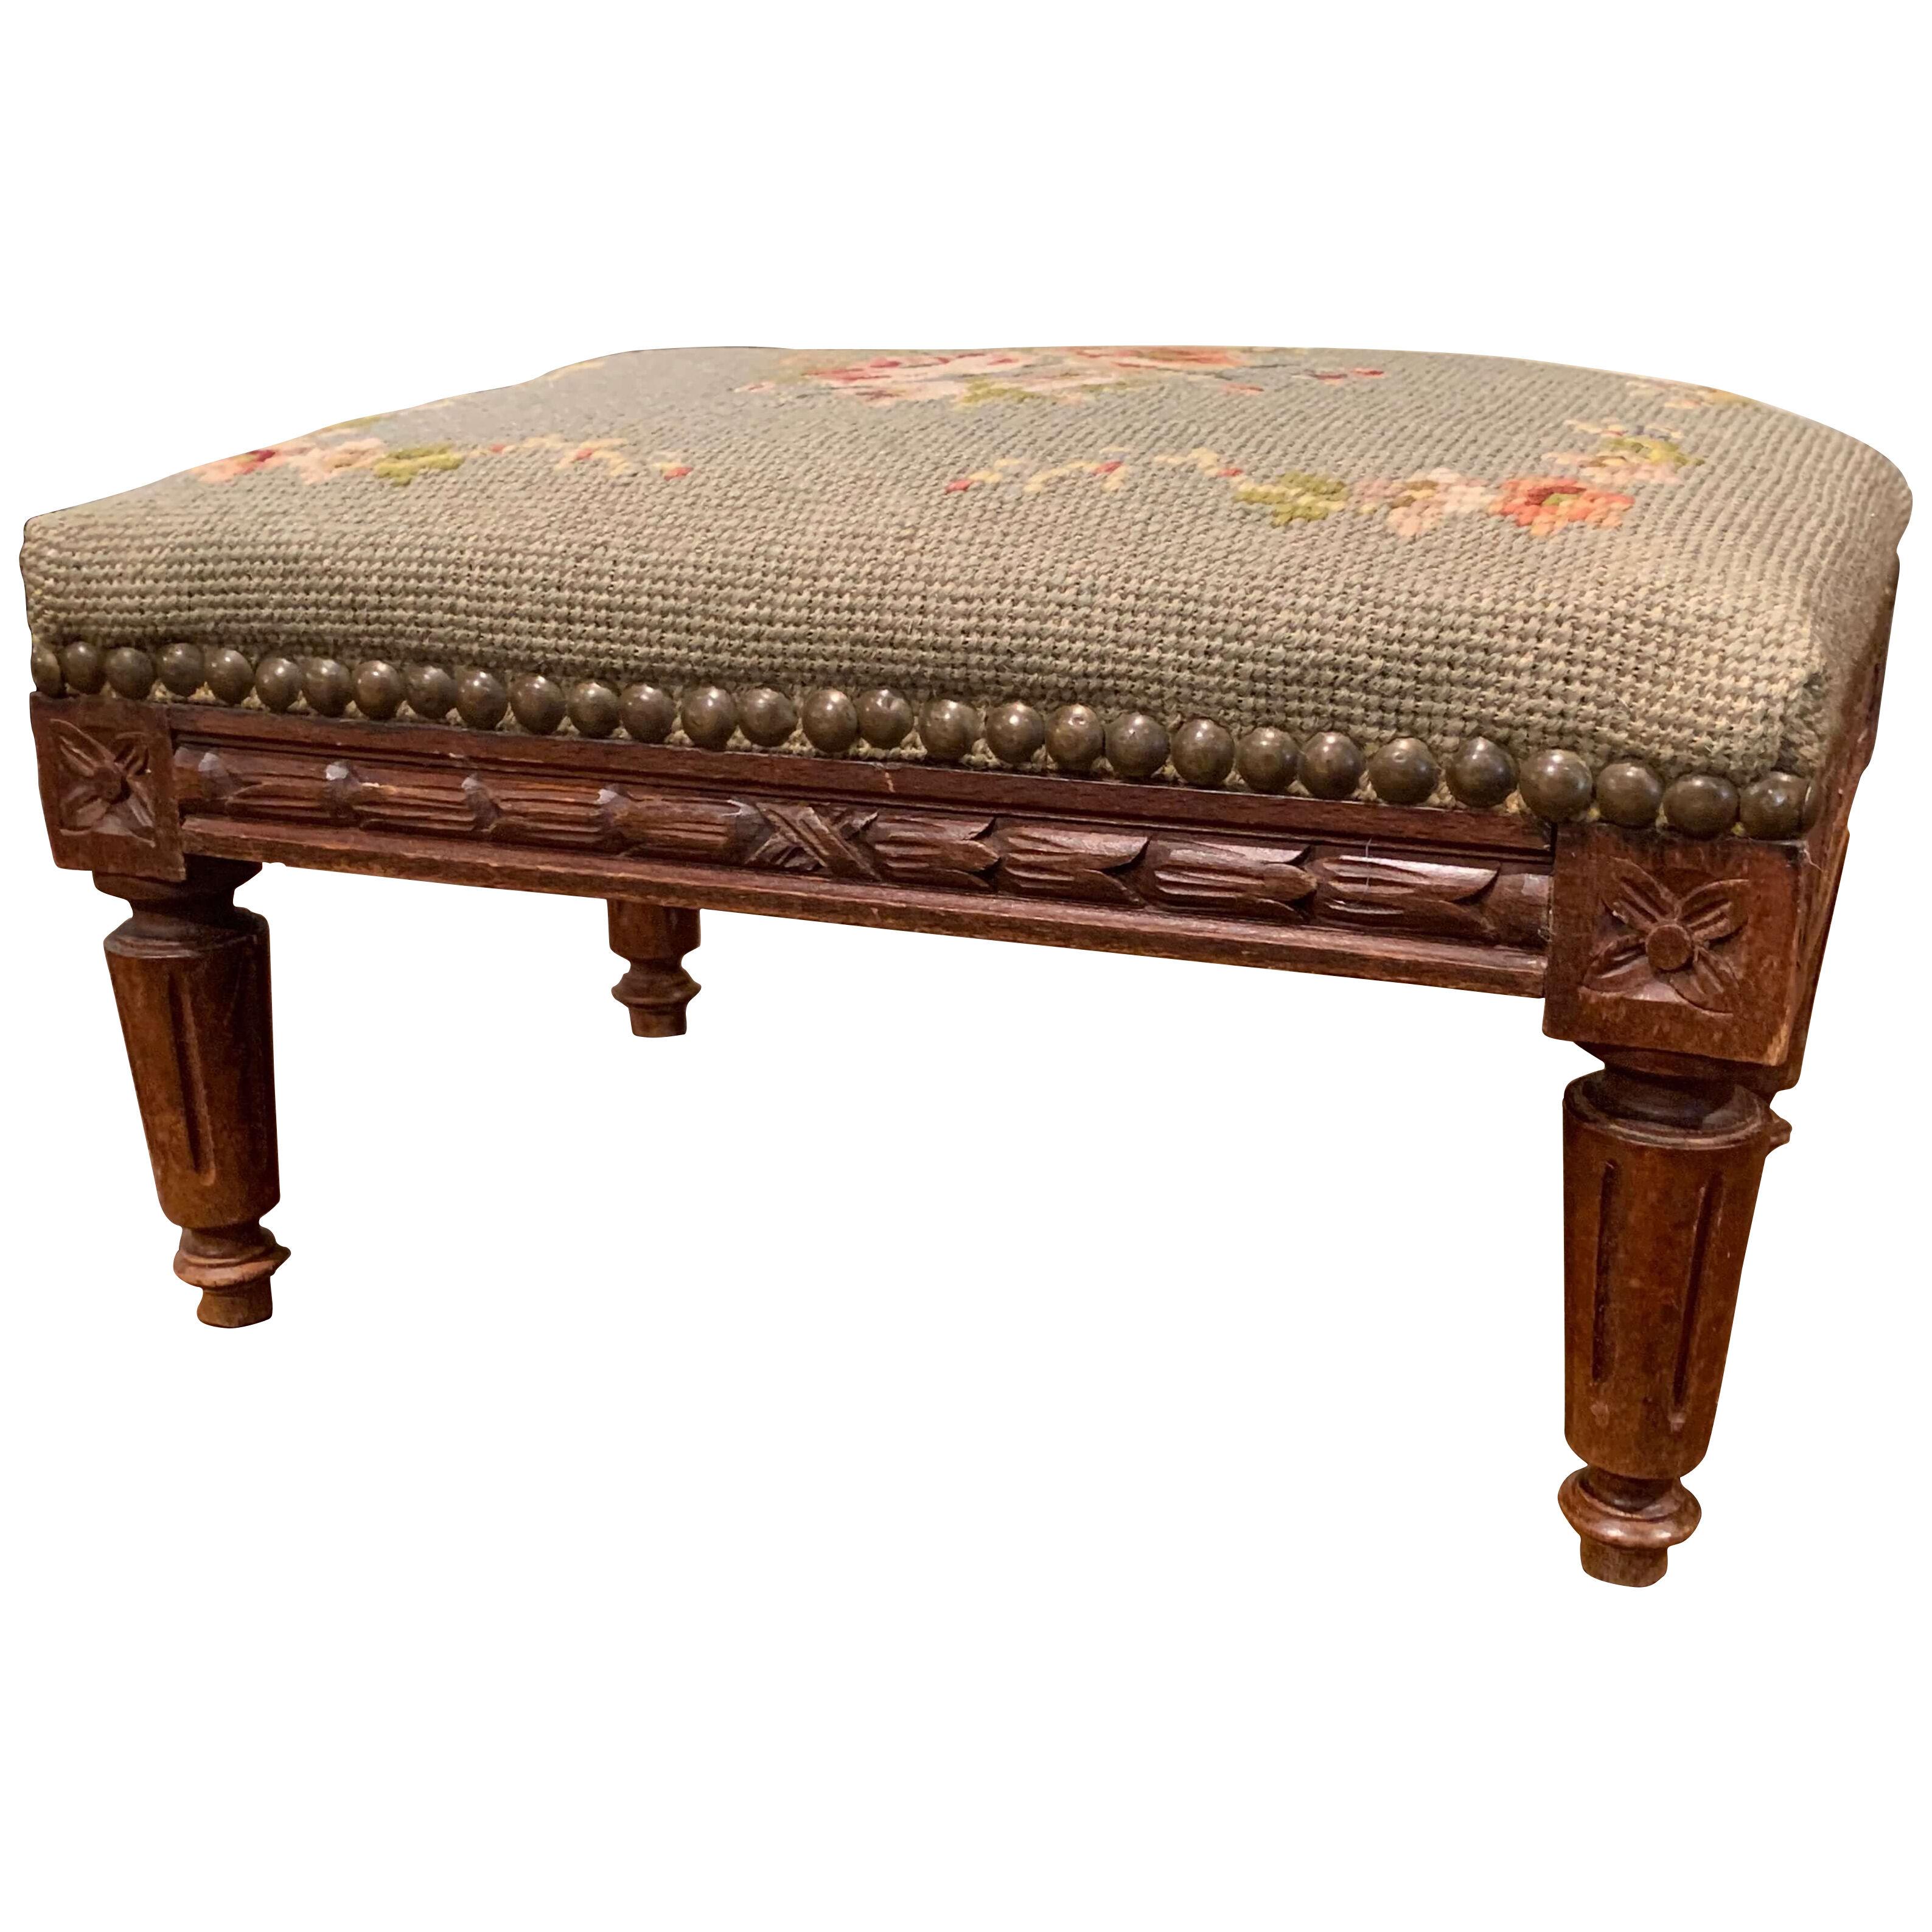 Early 20th Century French Walnut Footstool with Needlepoint Tapestry